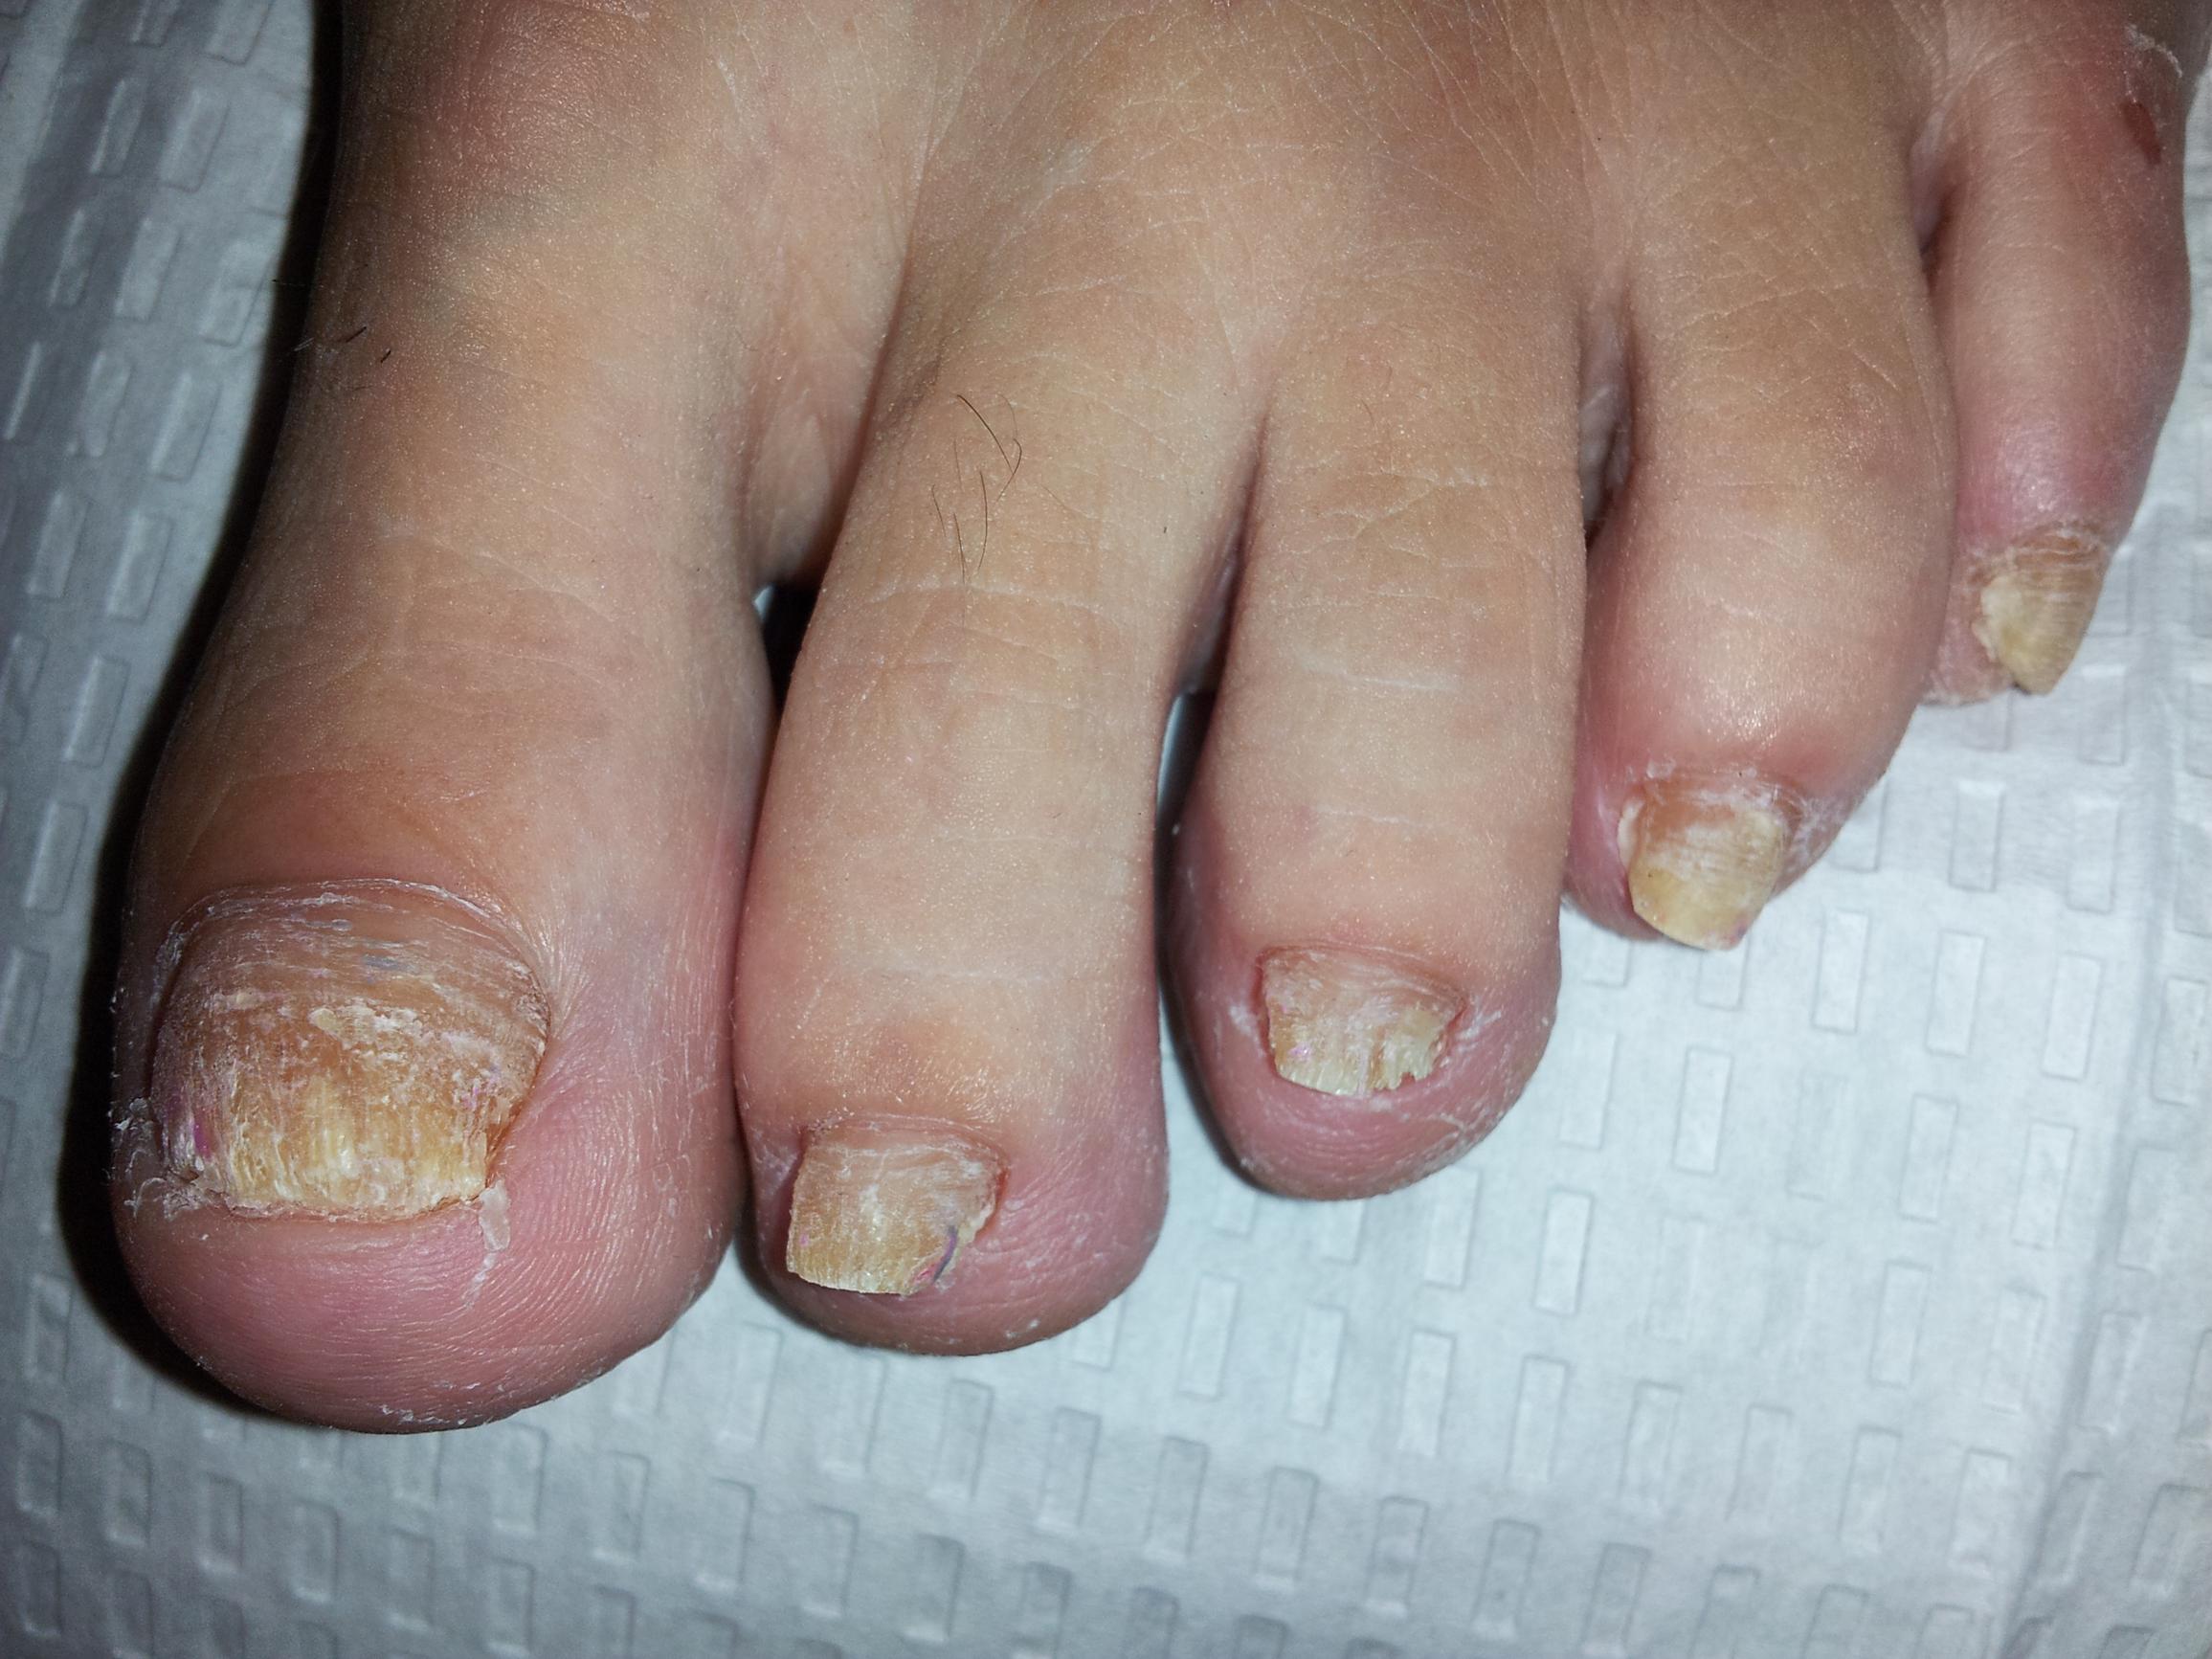 Laser treatment for toenail fungus: Does it work?